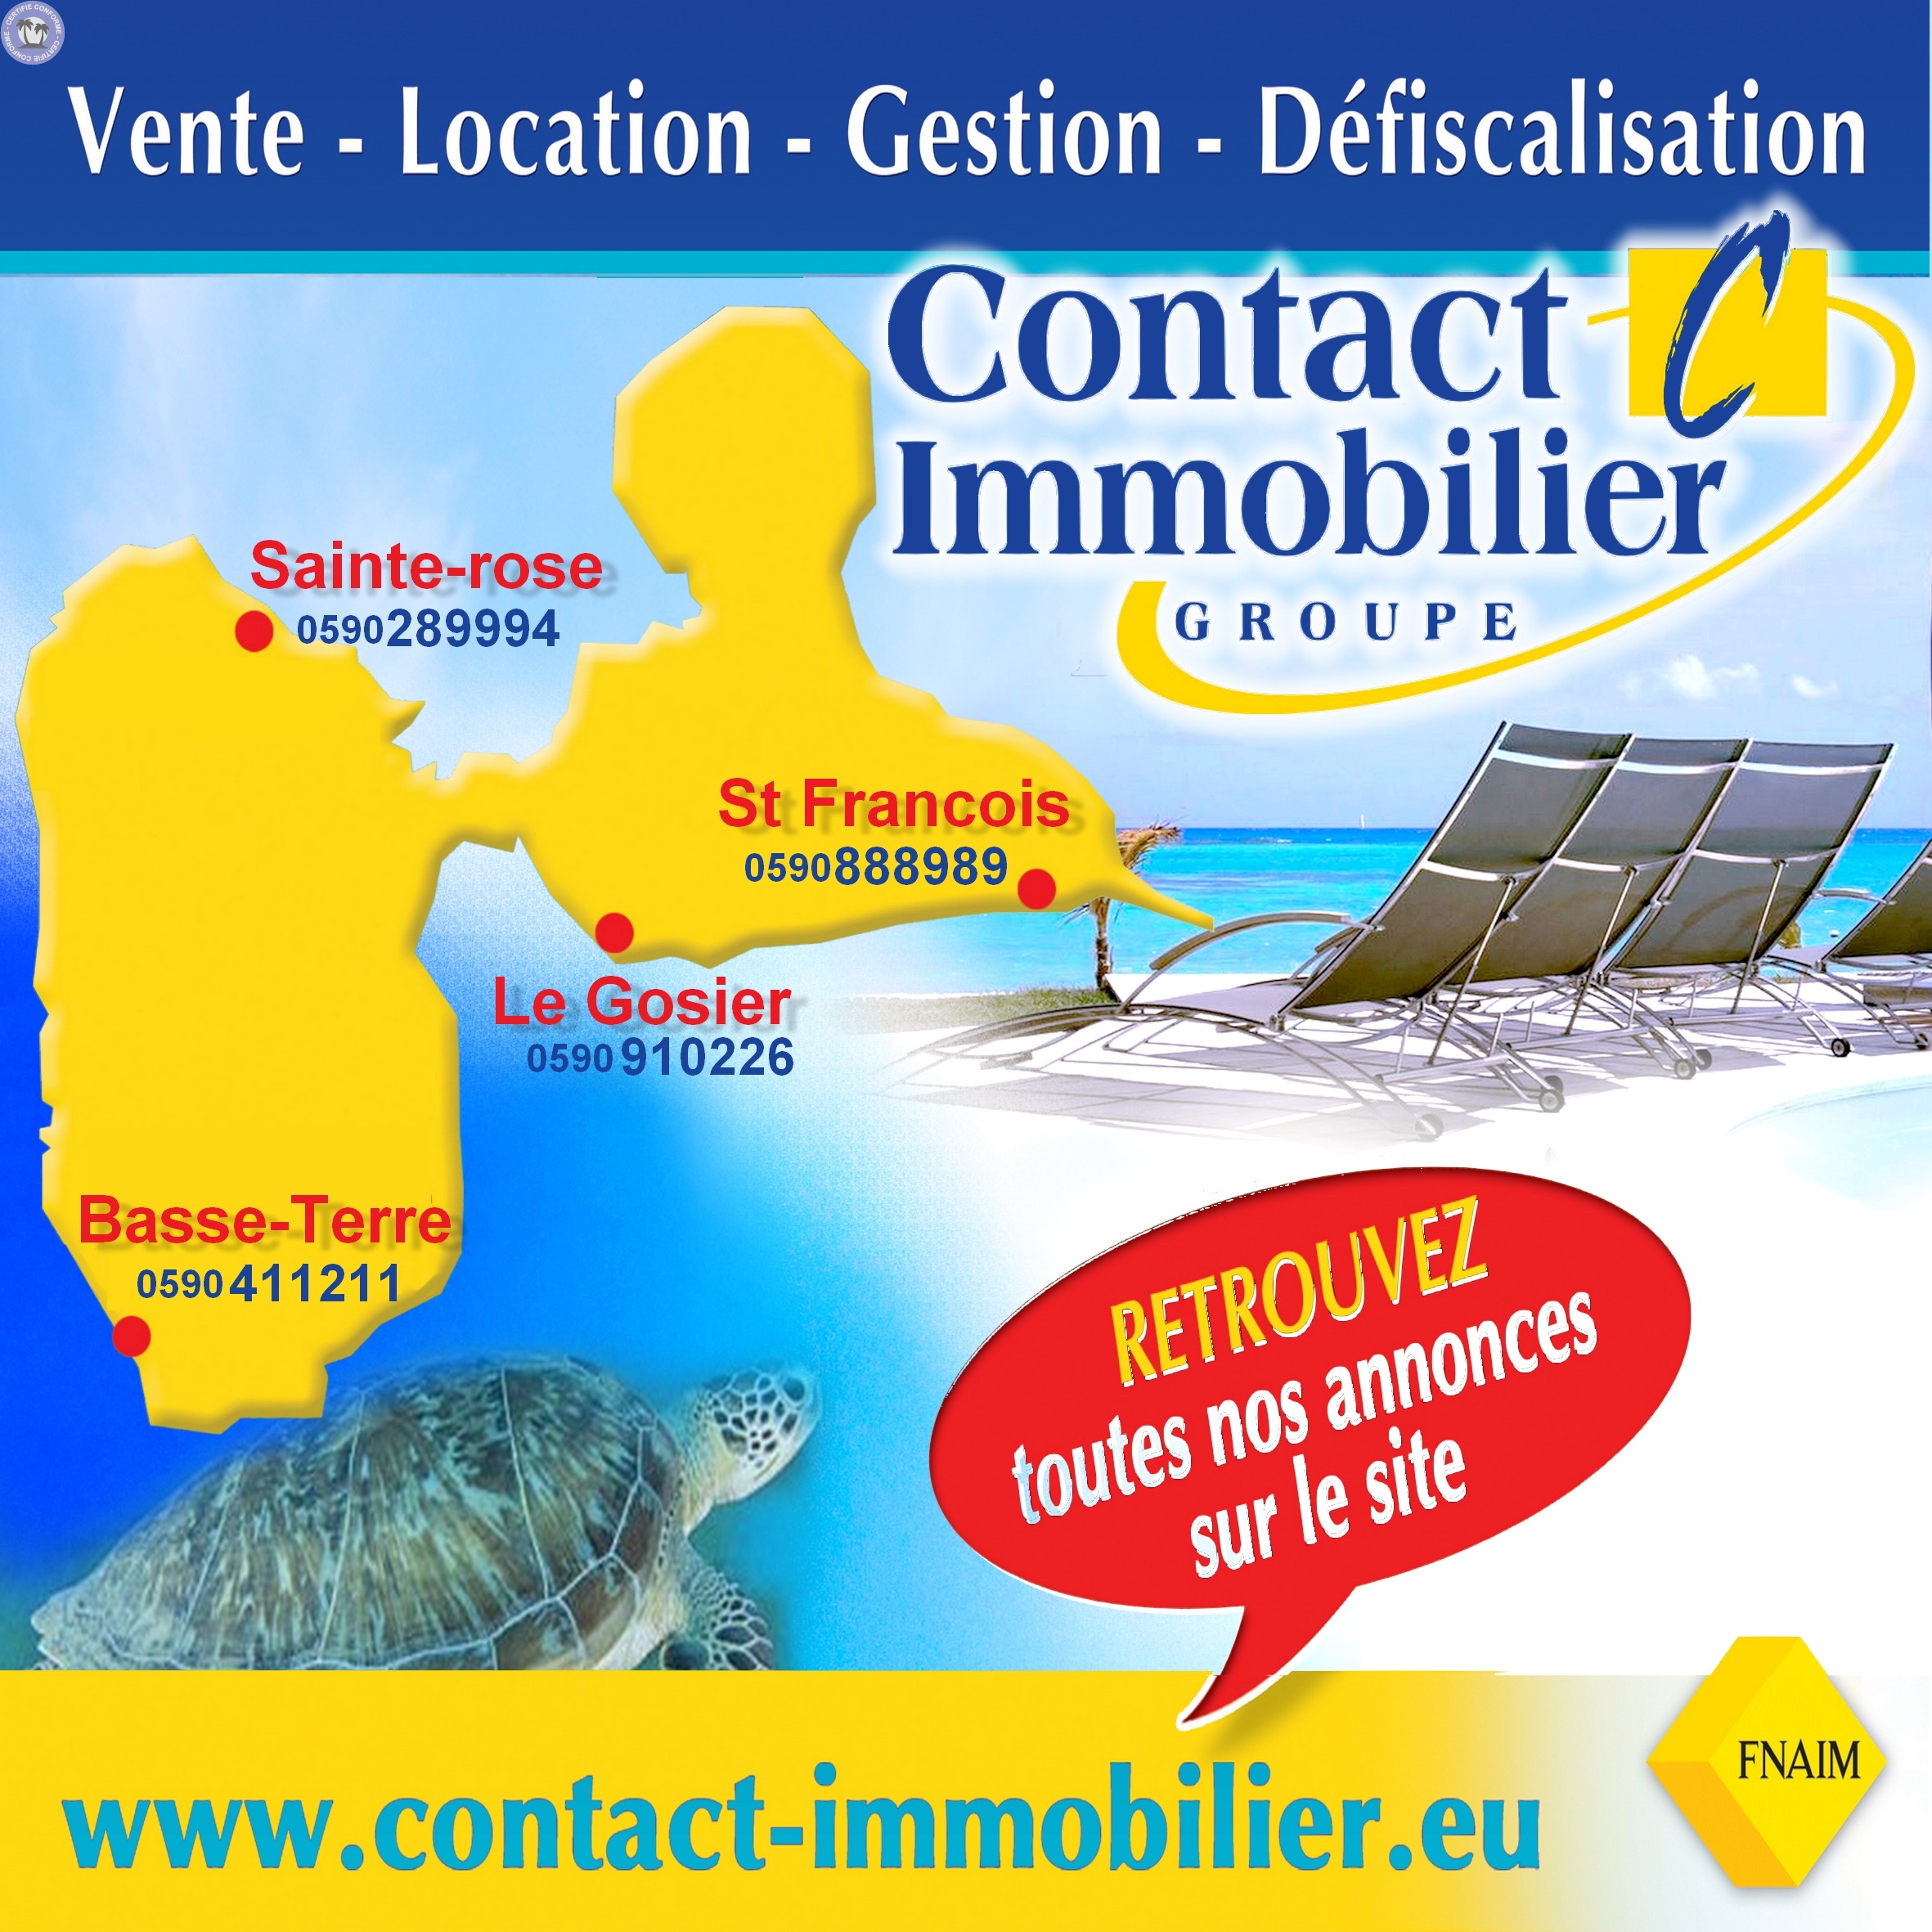 Immobilier-Guadeloupe-CONTACT-IMMOBILIER-GUADELOUPE-GUADELOUPE7111824283641627174.jpg